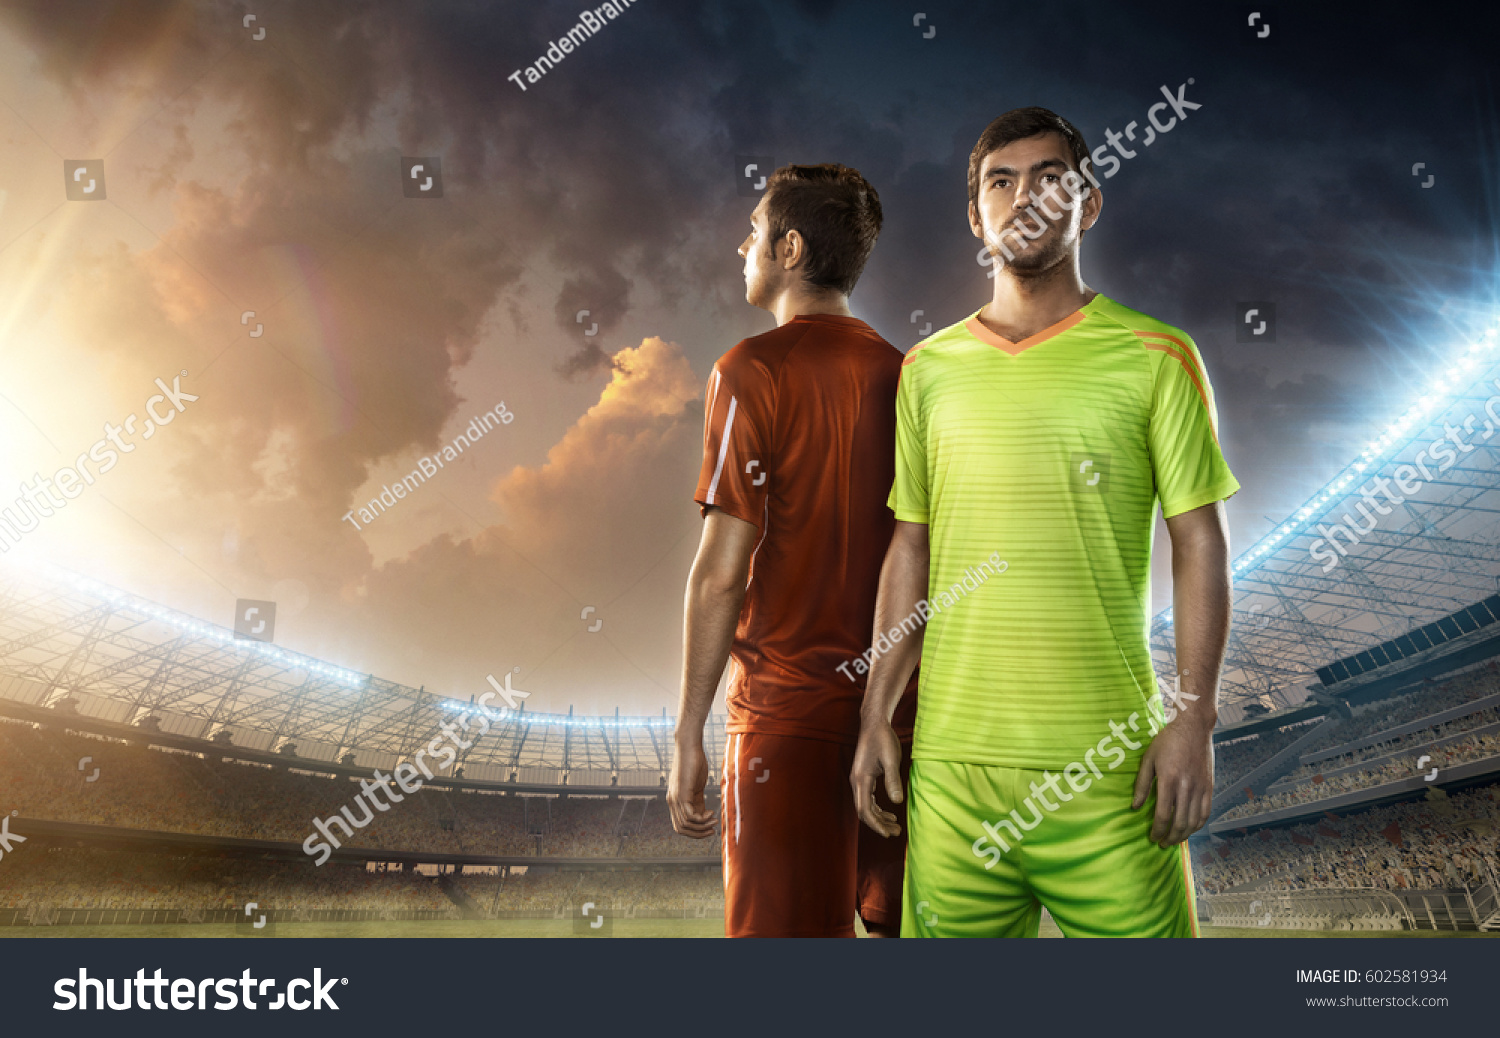 Two soccer players on a stadium #602581934